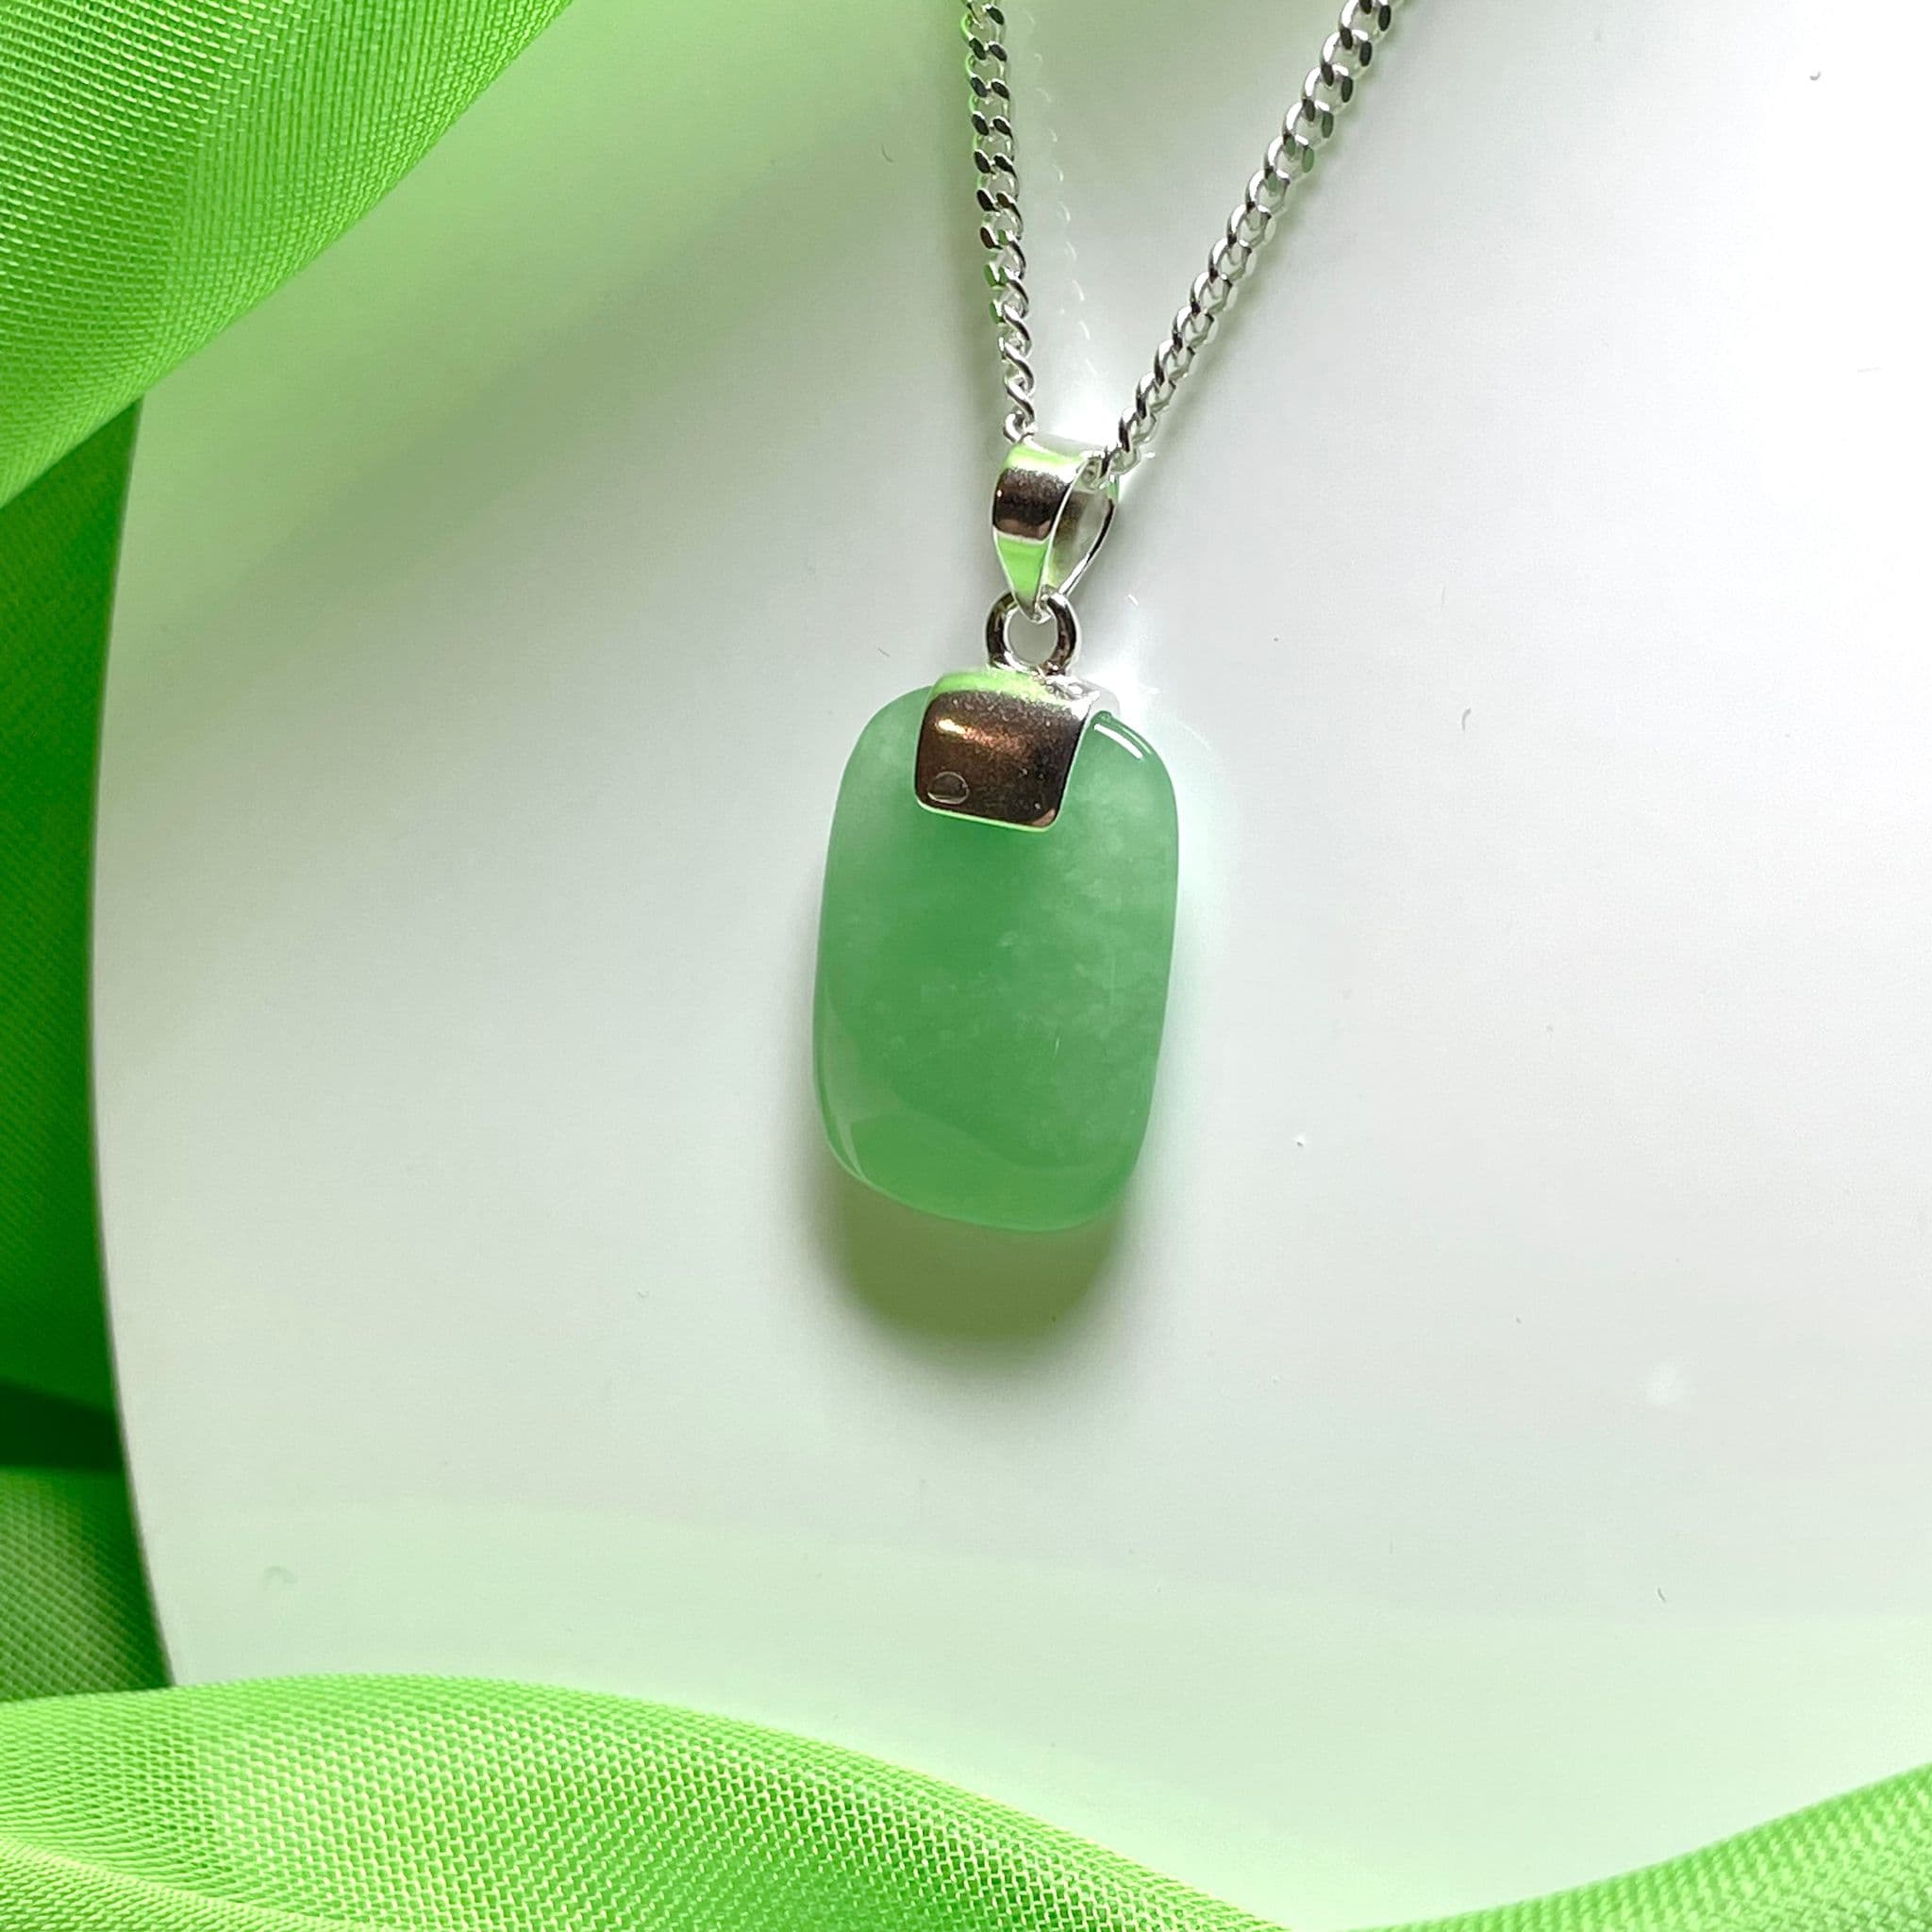 Buy Shiv Ram Jyotish Kendra Jade Green Stone Ganesh Pendant in Sterling  Silver Jewelry with German Silver Chain For Men Women Natural Green Jade  Pendant Certified Energized Gemstone Online at Best Prices